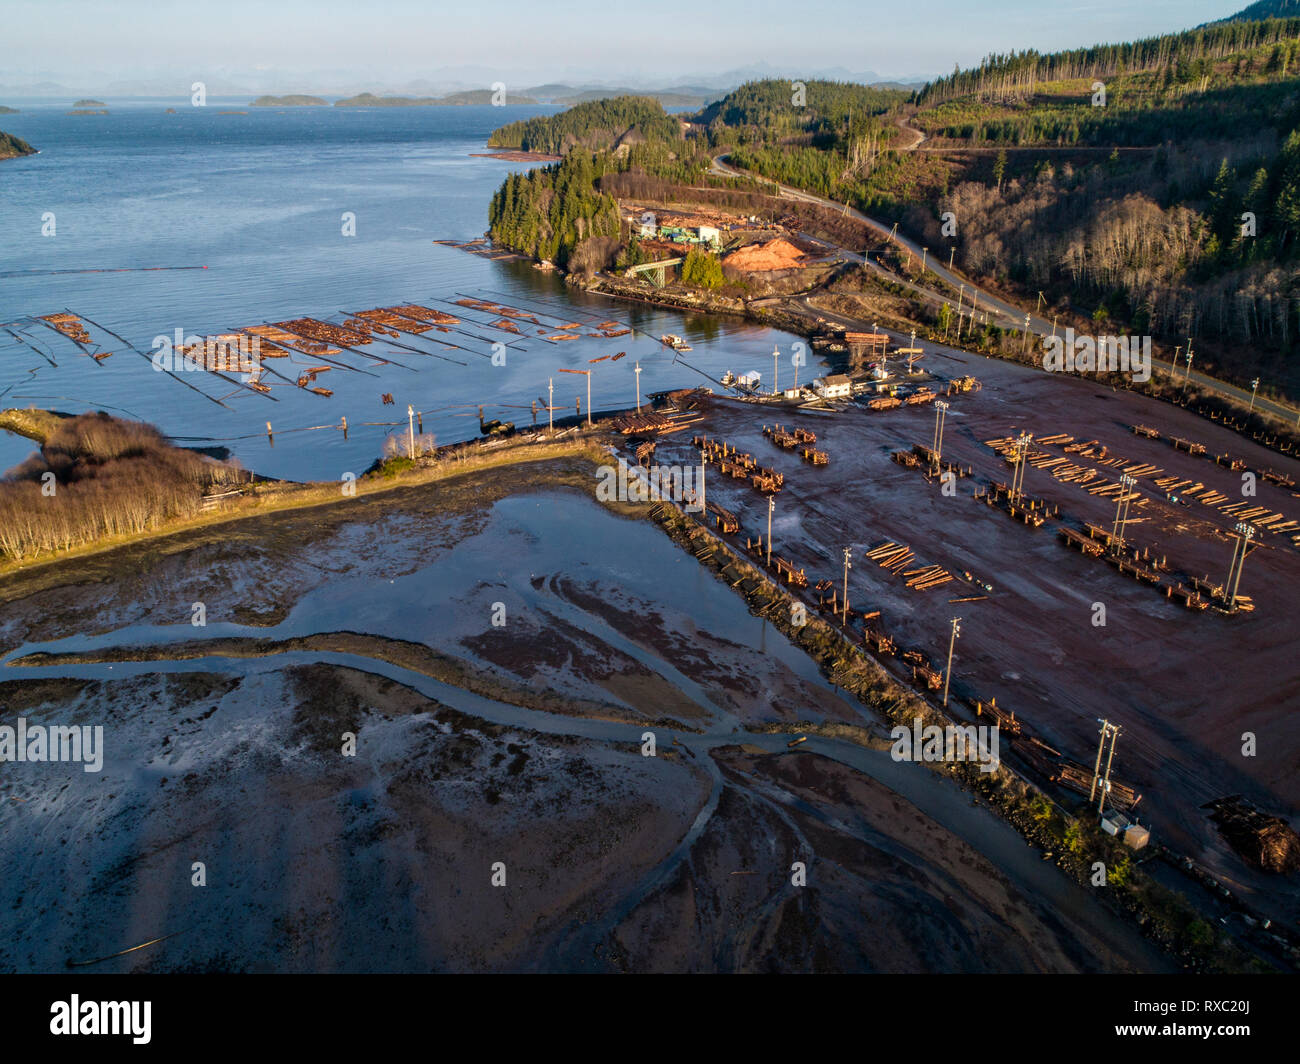 Aerial view of logs in the water at Beaver Cove Log Sort near Telegraph Cove, Northern Vancouver Island, British Columbia, Canada. Stock Photo